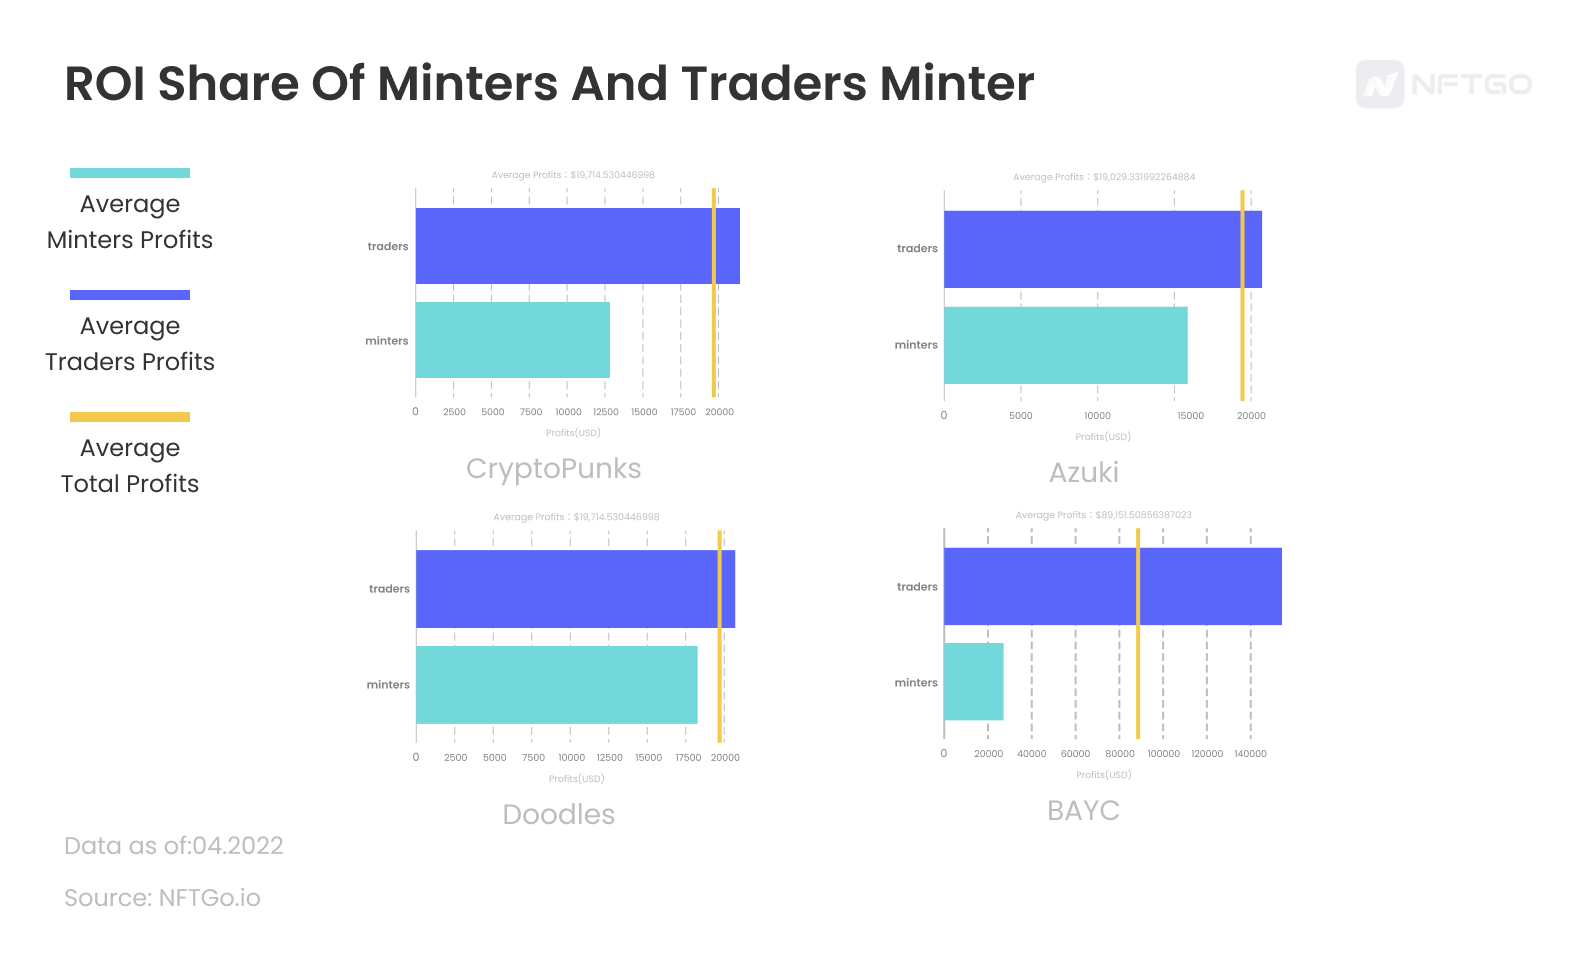 ROI Share Of Minters And Traders for blue-chips; Data source: NFTGo.io